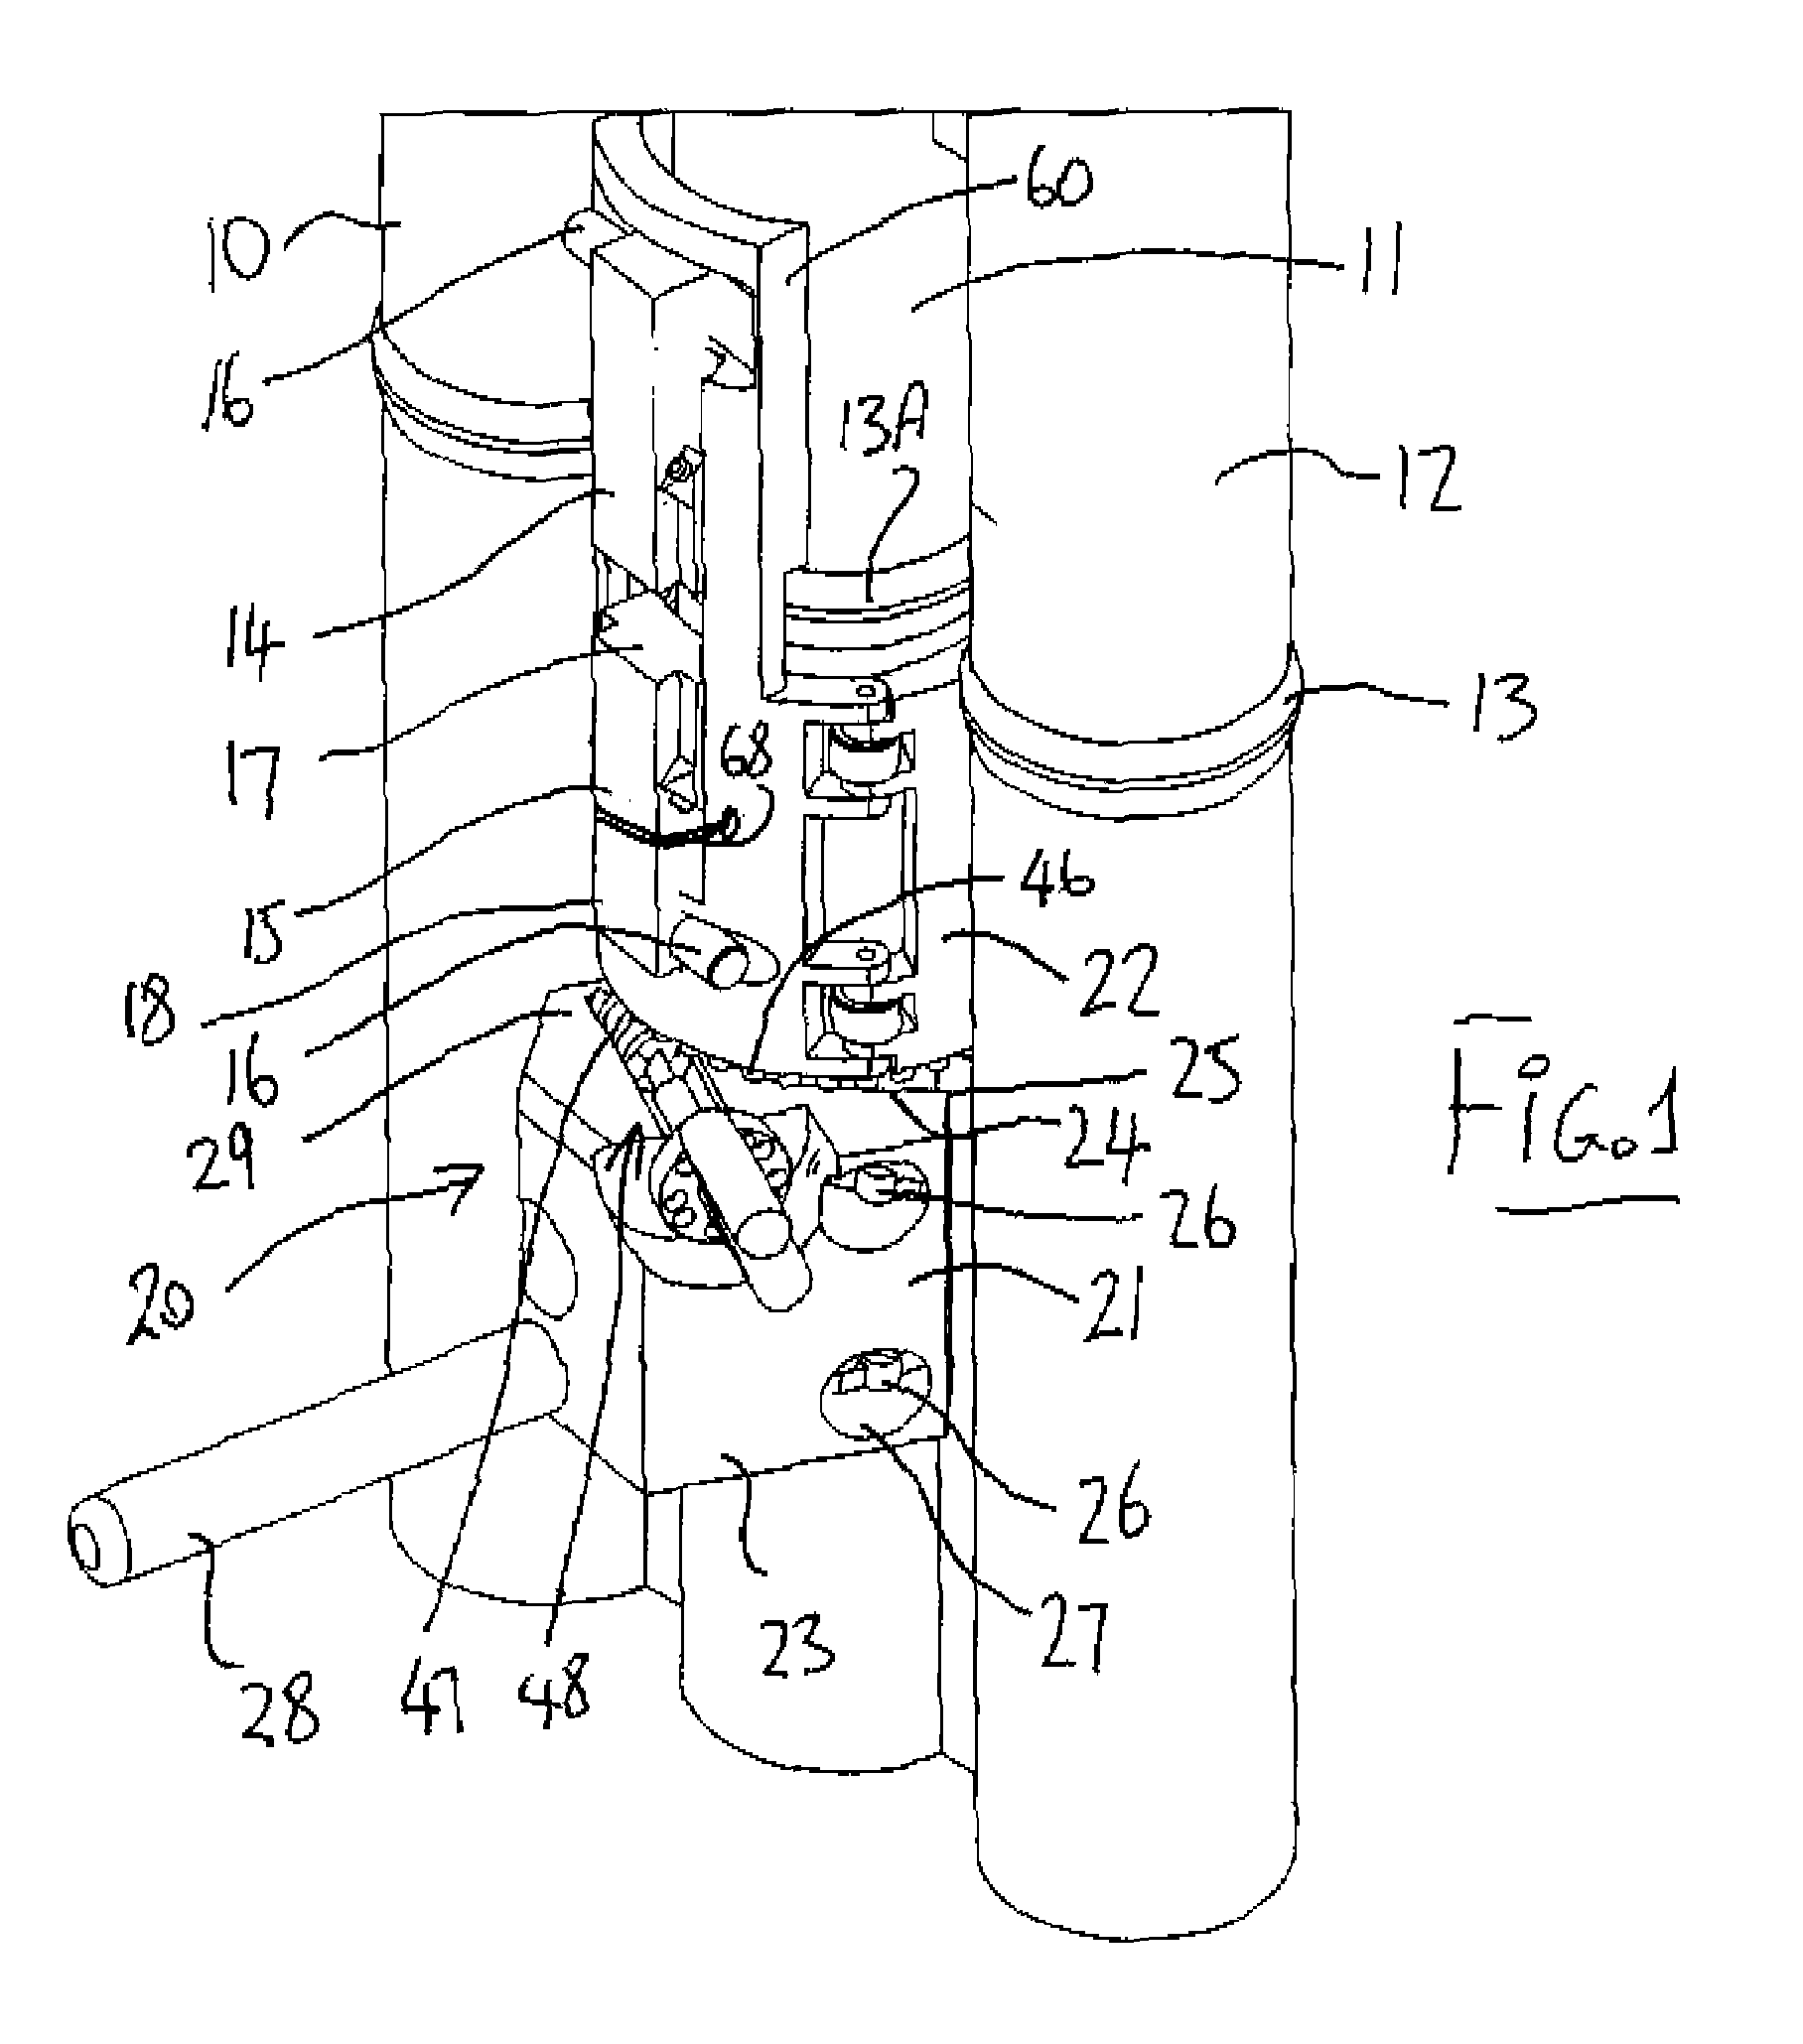 Apparatus for structural testing of a cylindrical body